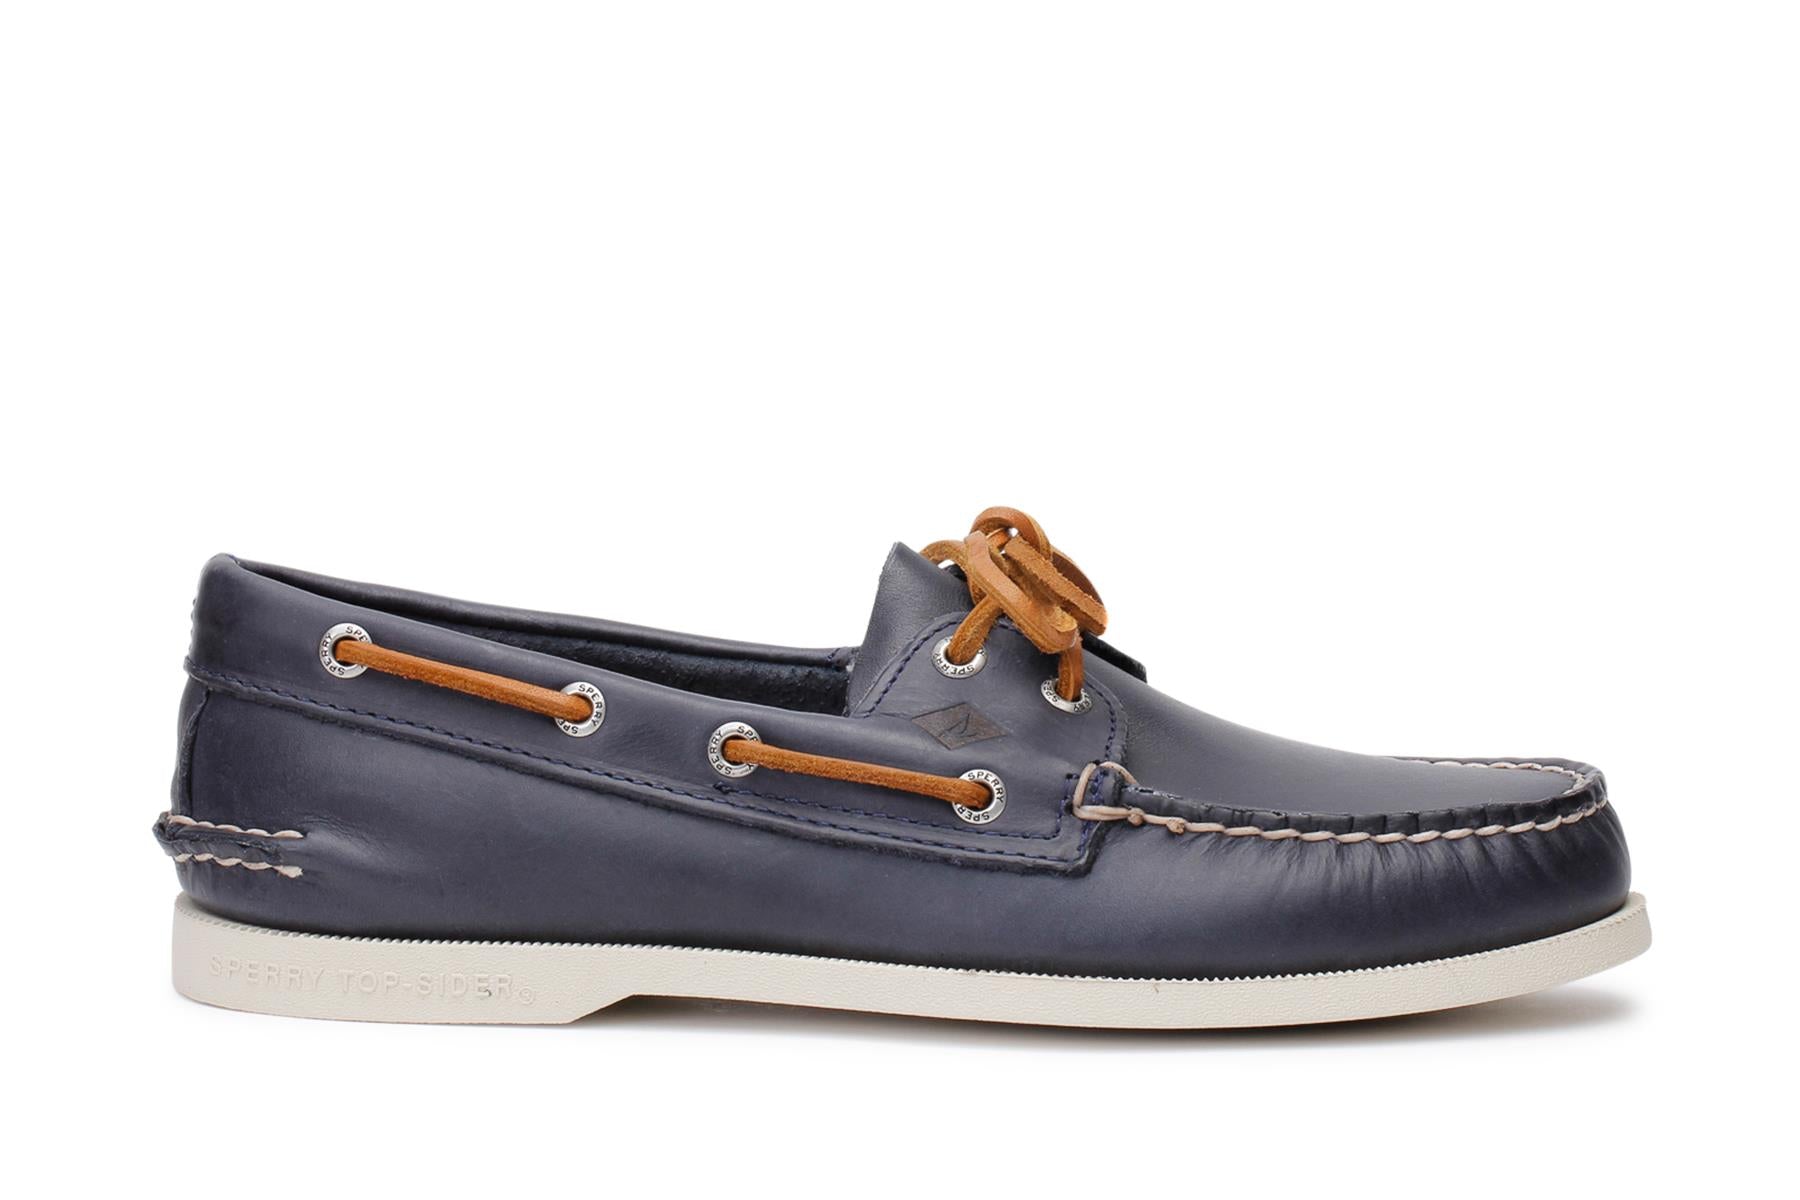 sperry-top-sider-mens-boat-shoes-a-o-2-eye-sarape-navy-sts13804-main